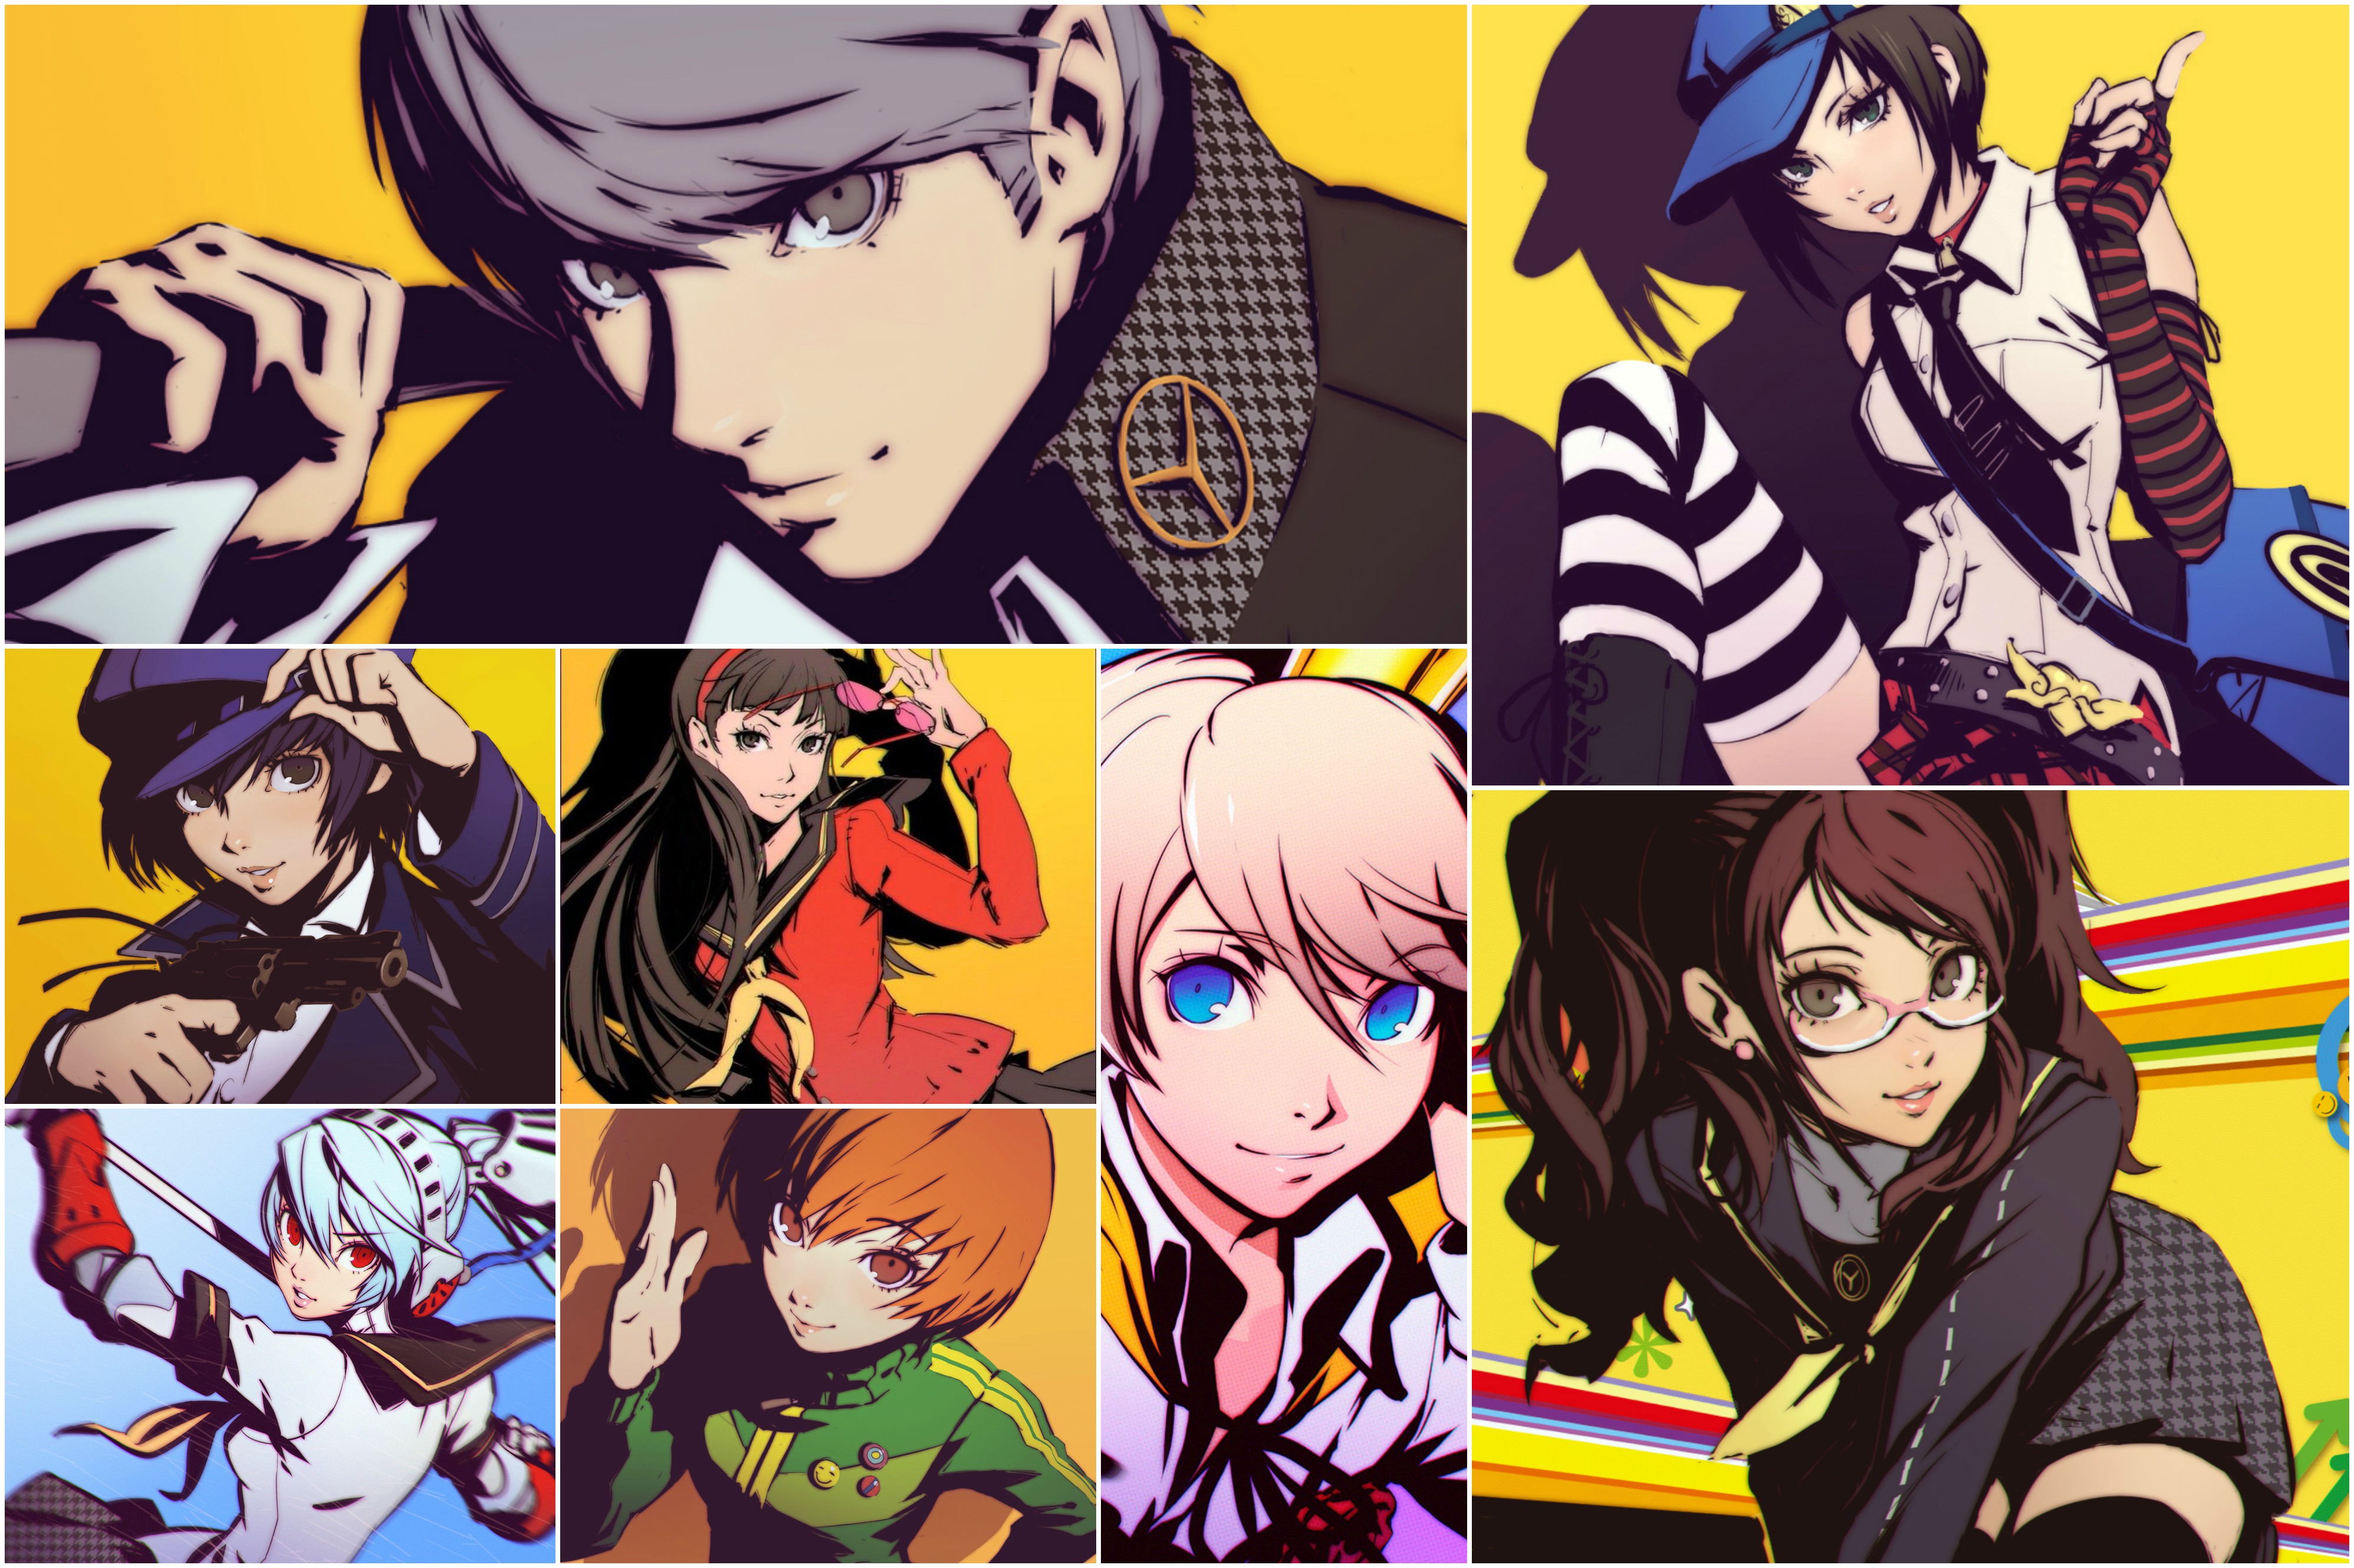 Persona 4 Hd Wallpapers Pictures Images 